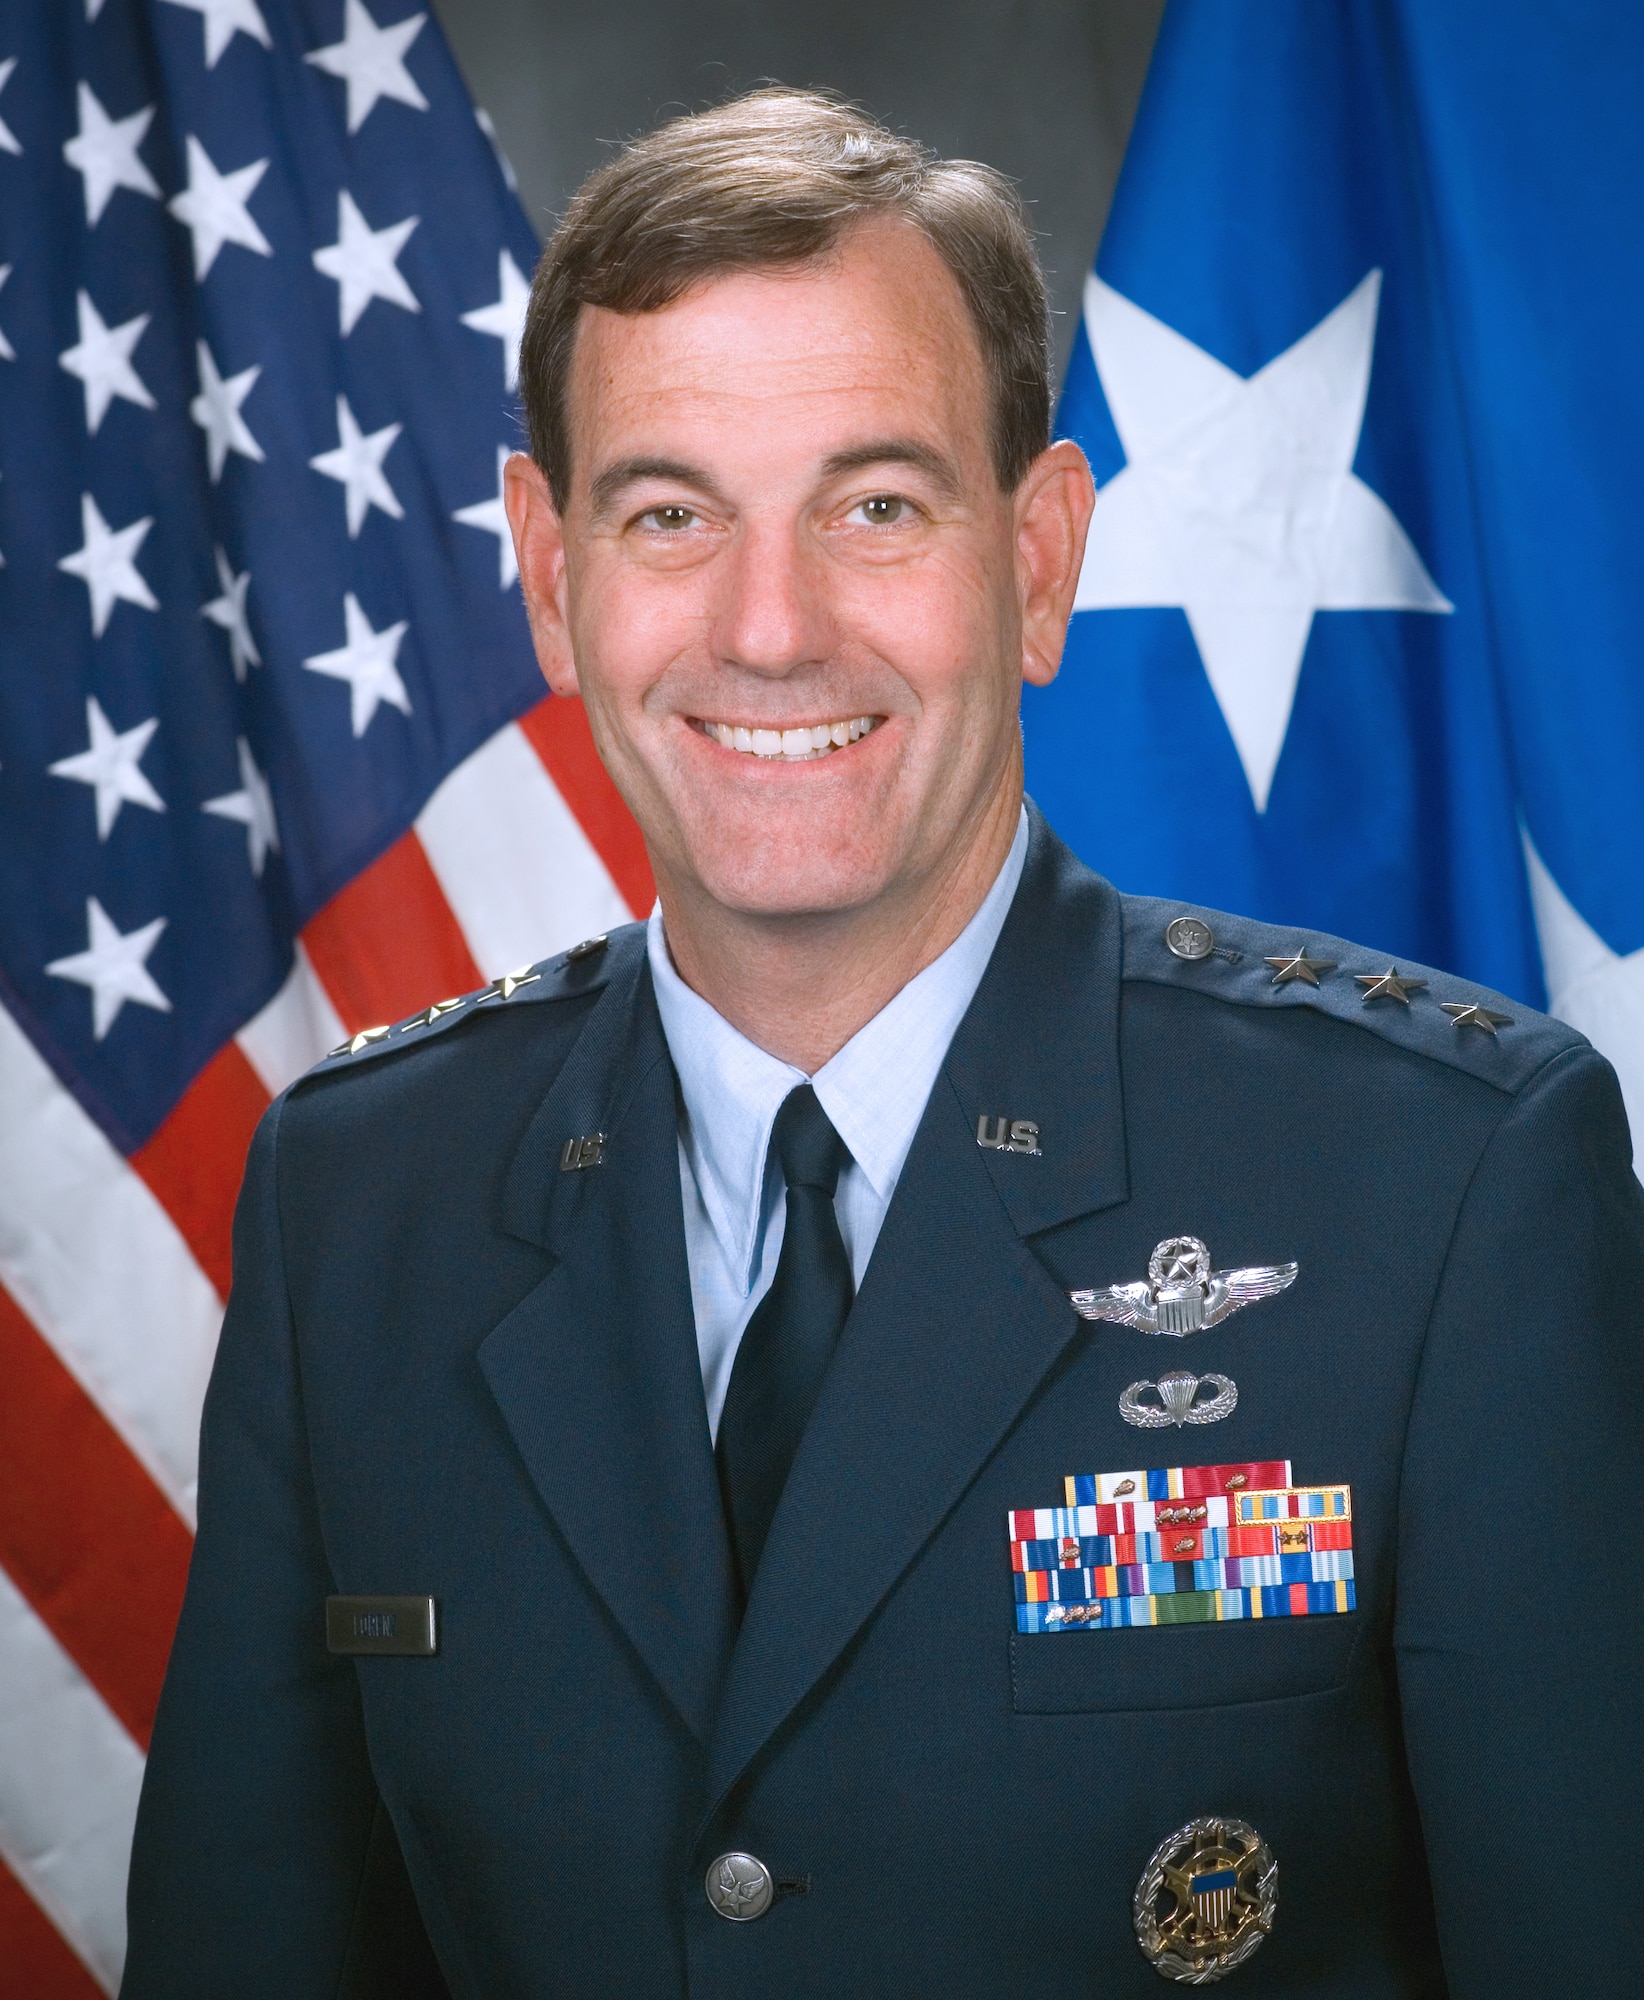 President George W. Bush nominated Lt. Gen. Stephen R. Lorenz, Air University commander at Maxwell AFB, Ala., for his fourth star and to succeed General William R. Looney III as Air Education and Training Command commander. General Looney is scheduled to retire after leading AETC since June 2005.  (U.S. Air Force photo)